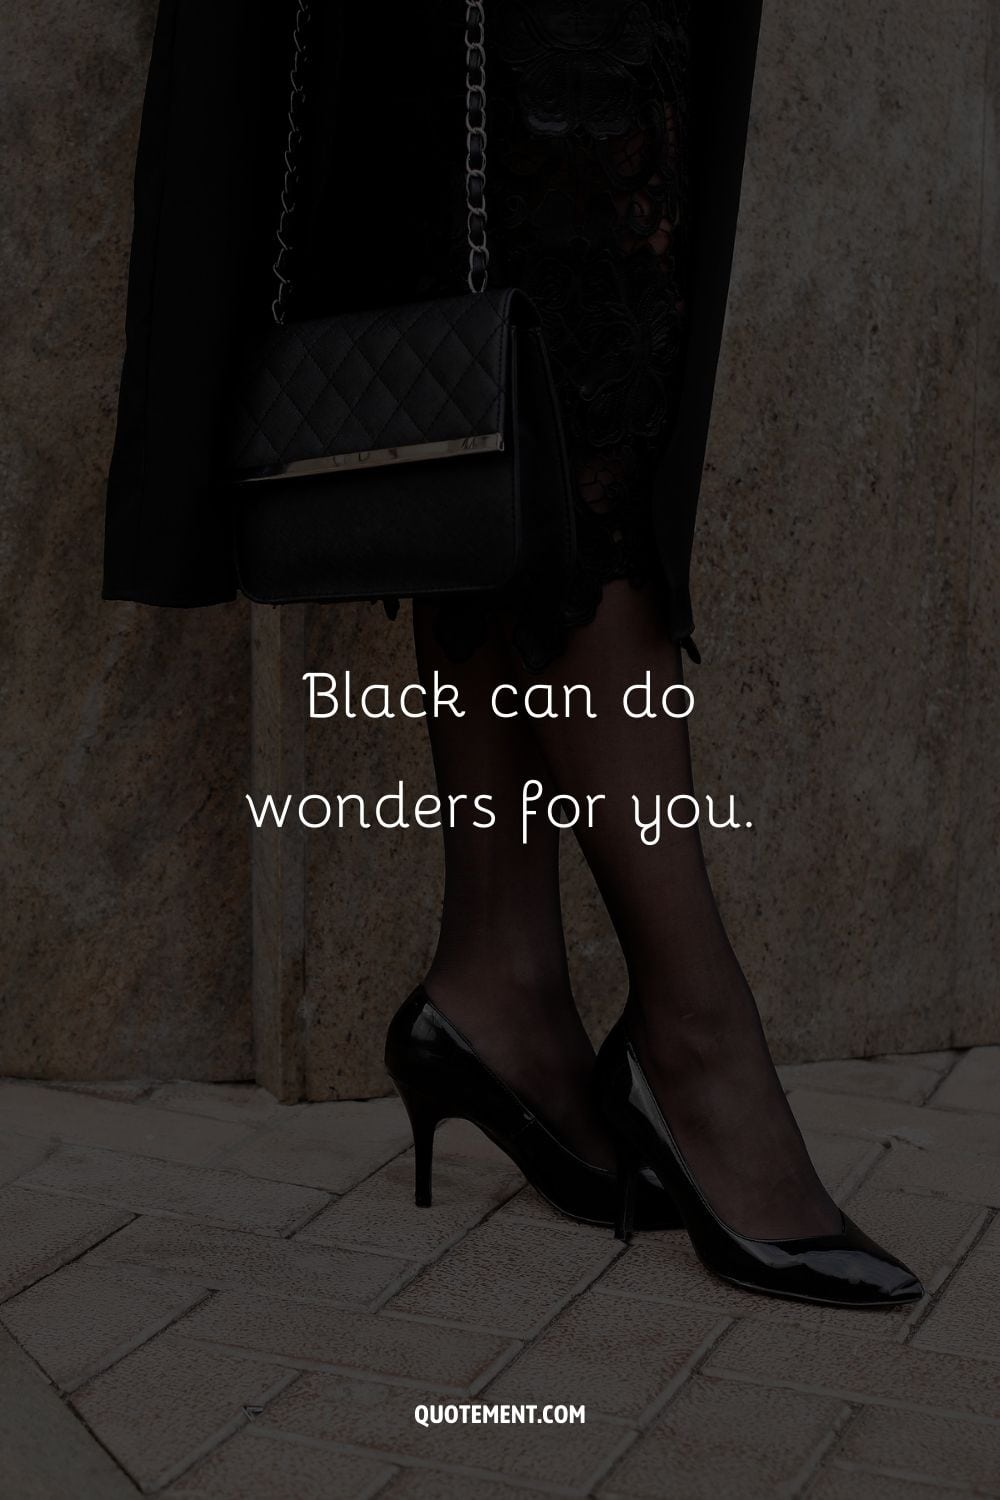 Black can do wonders for you.